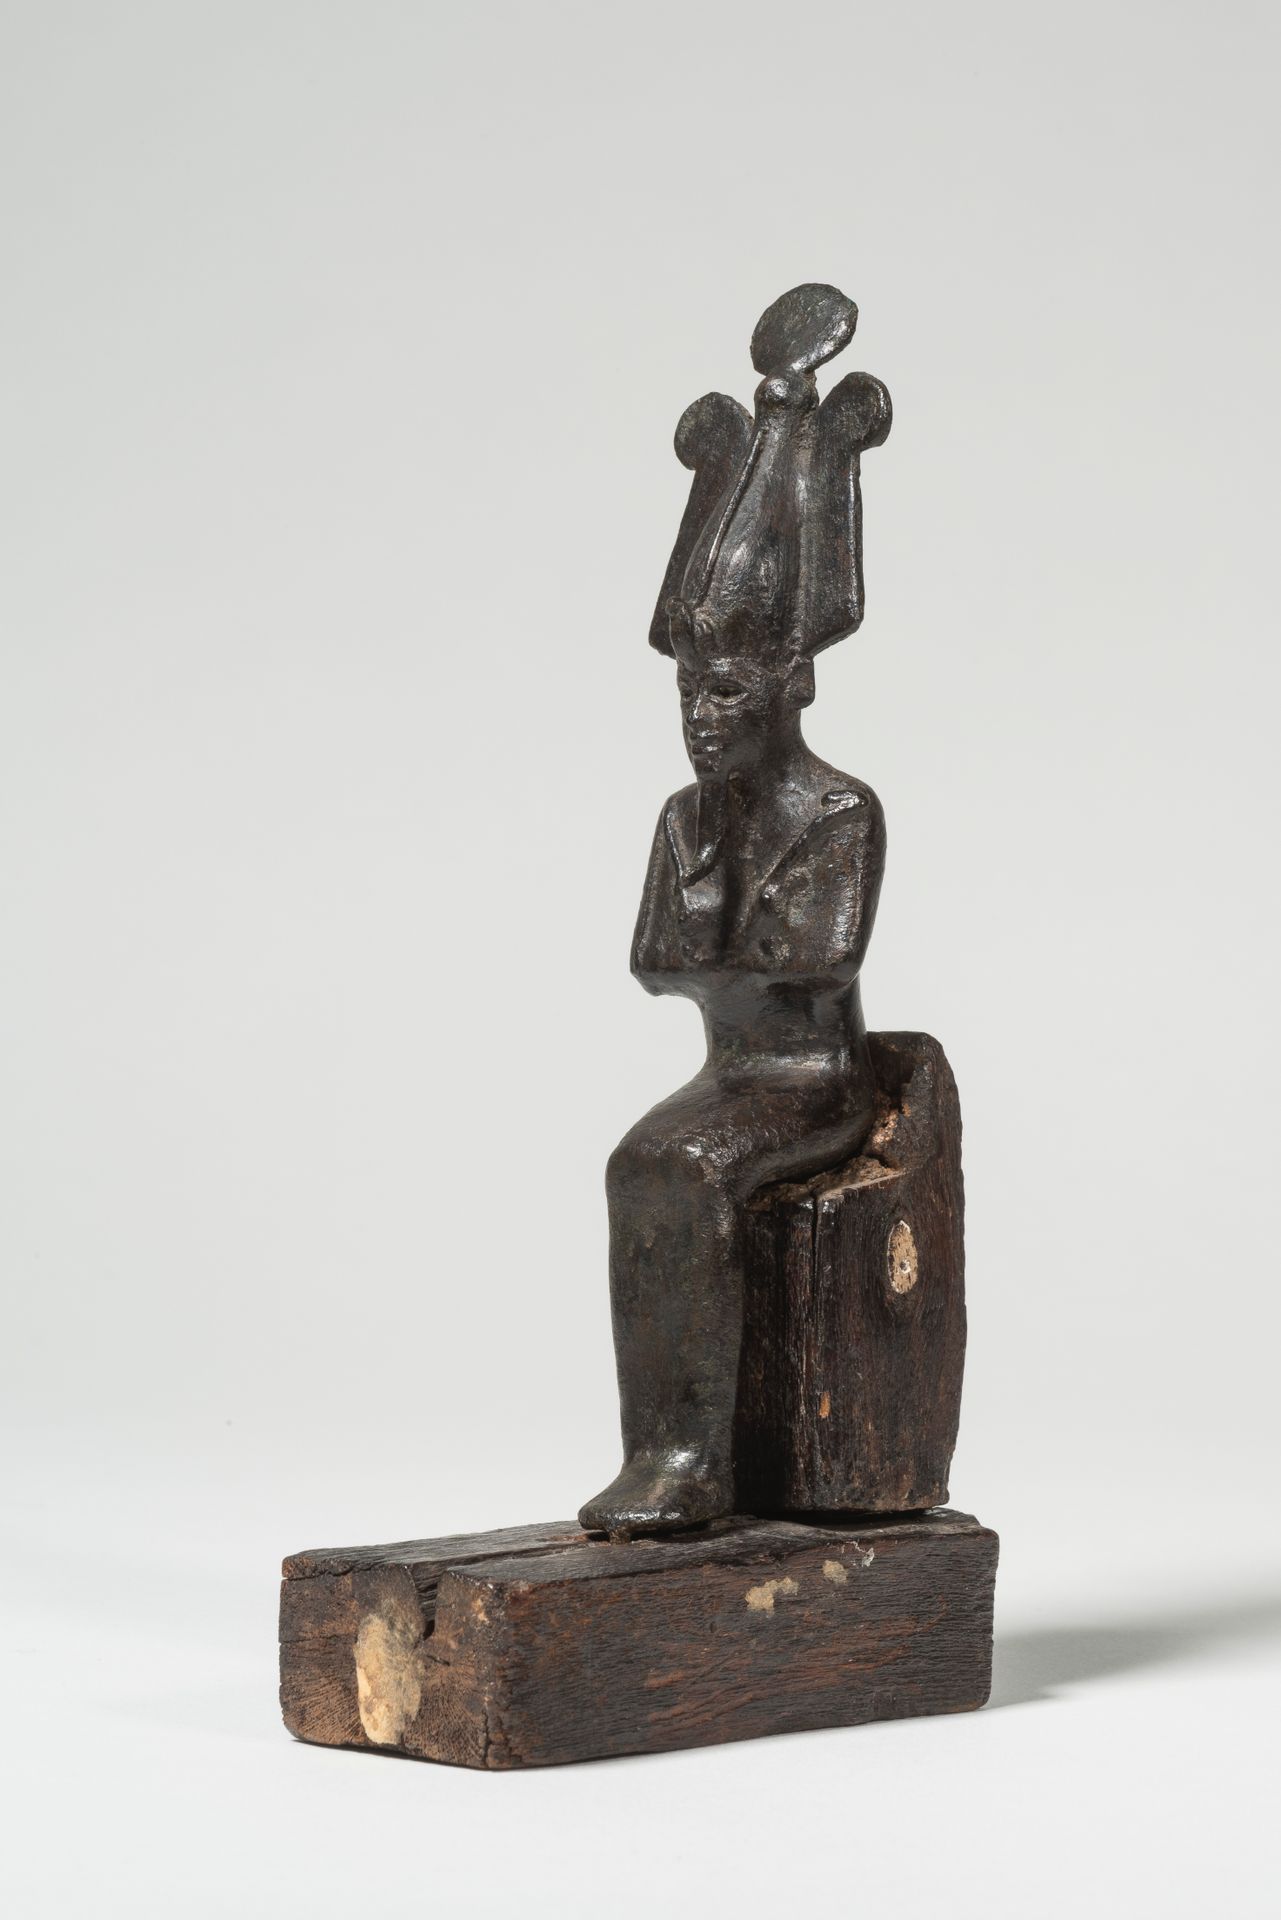 Statuette d’Osiris assis EGYPT, LATE PERIOD

Statuette of Osiris seated



He is&hellip;